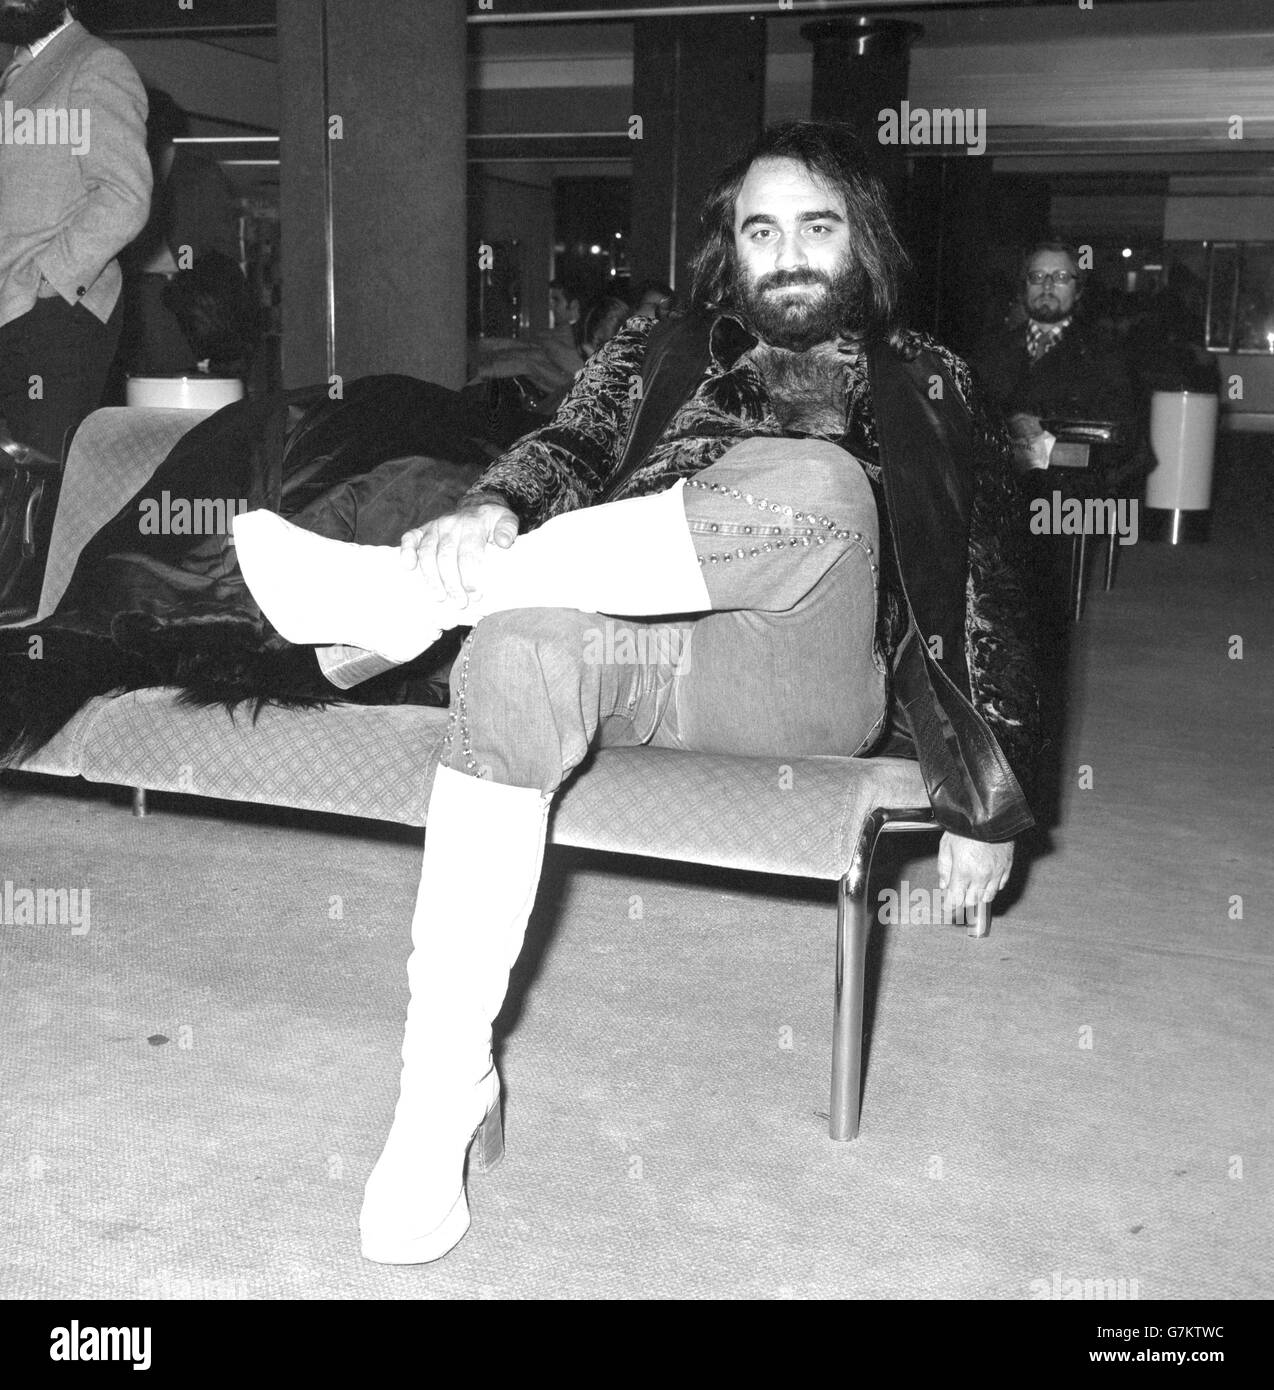 Greek singer Demis Roussos at London's Heathrow Airport, where he was leaving for a tour of Scandinavia. Stock Photo